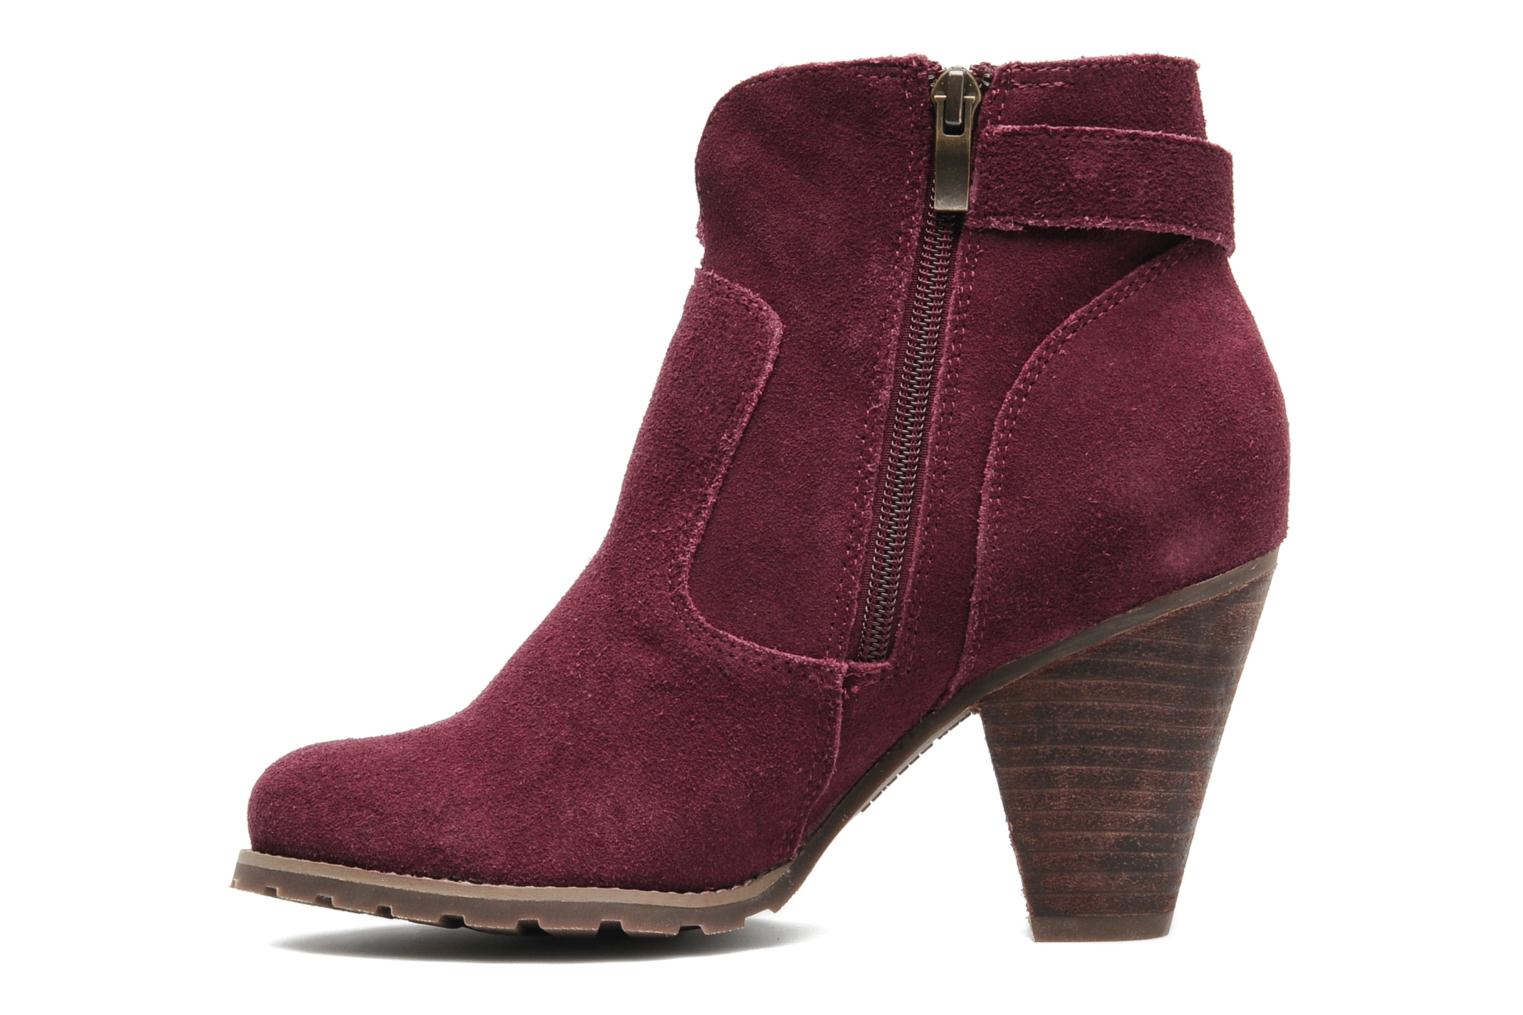 Hush Puppies Revive Ank Boot_Bu Ankle boots in Burgundy at Sarenza.co ...